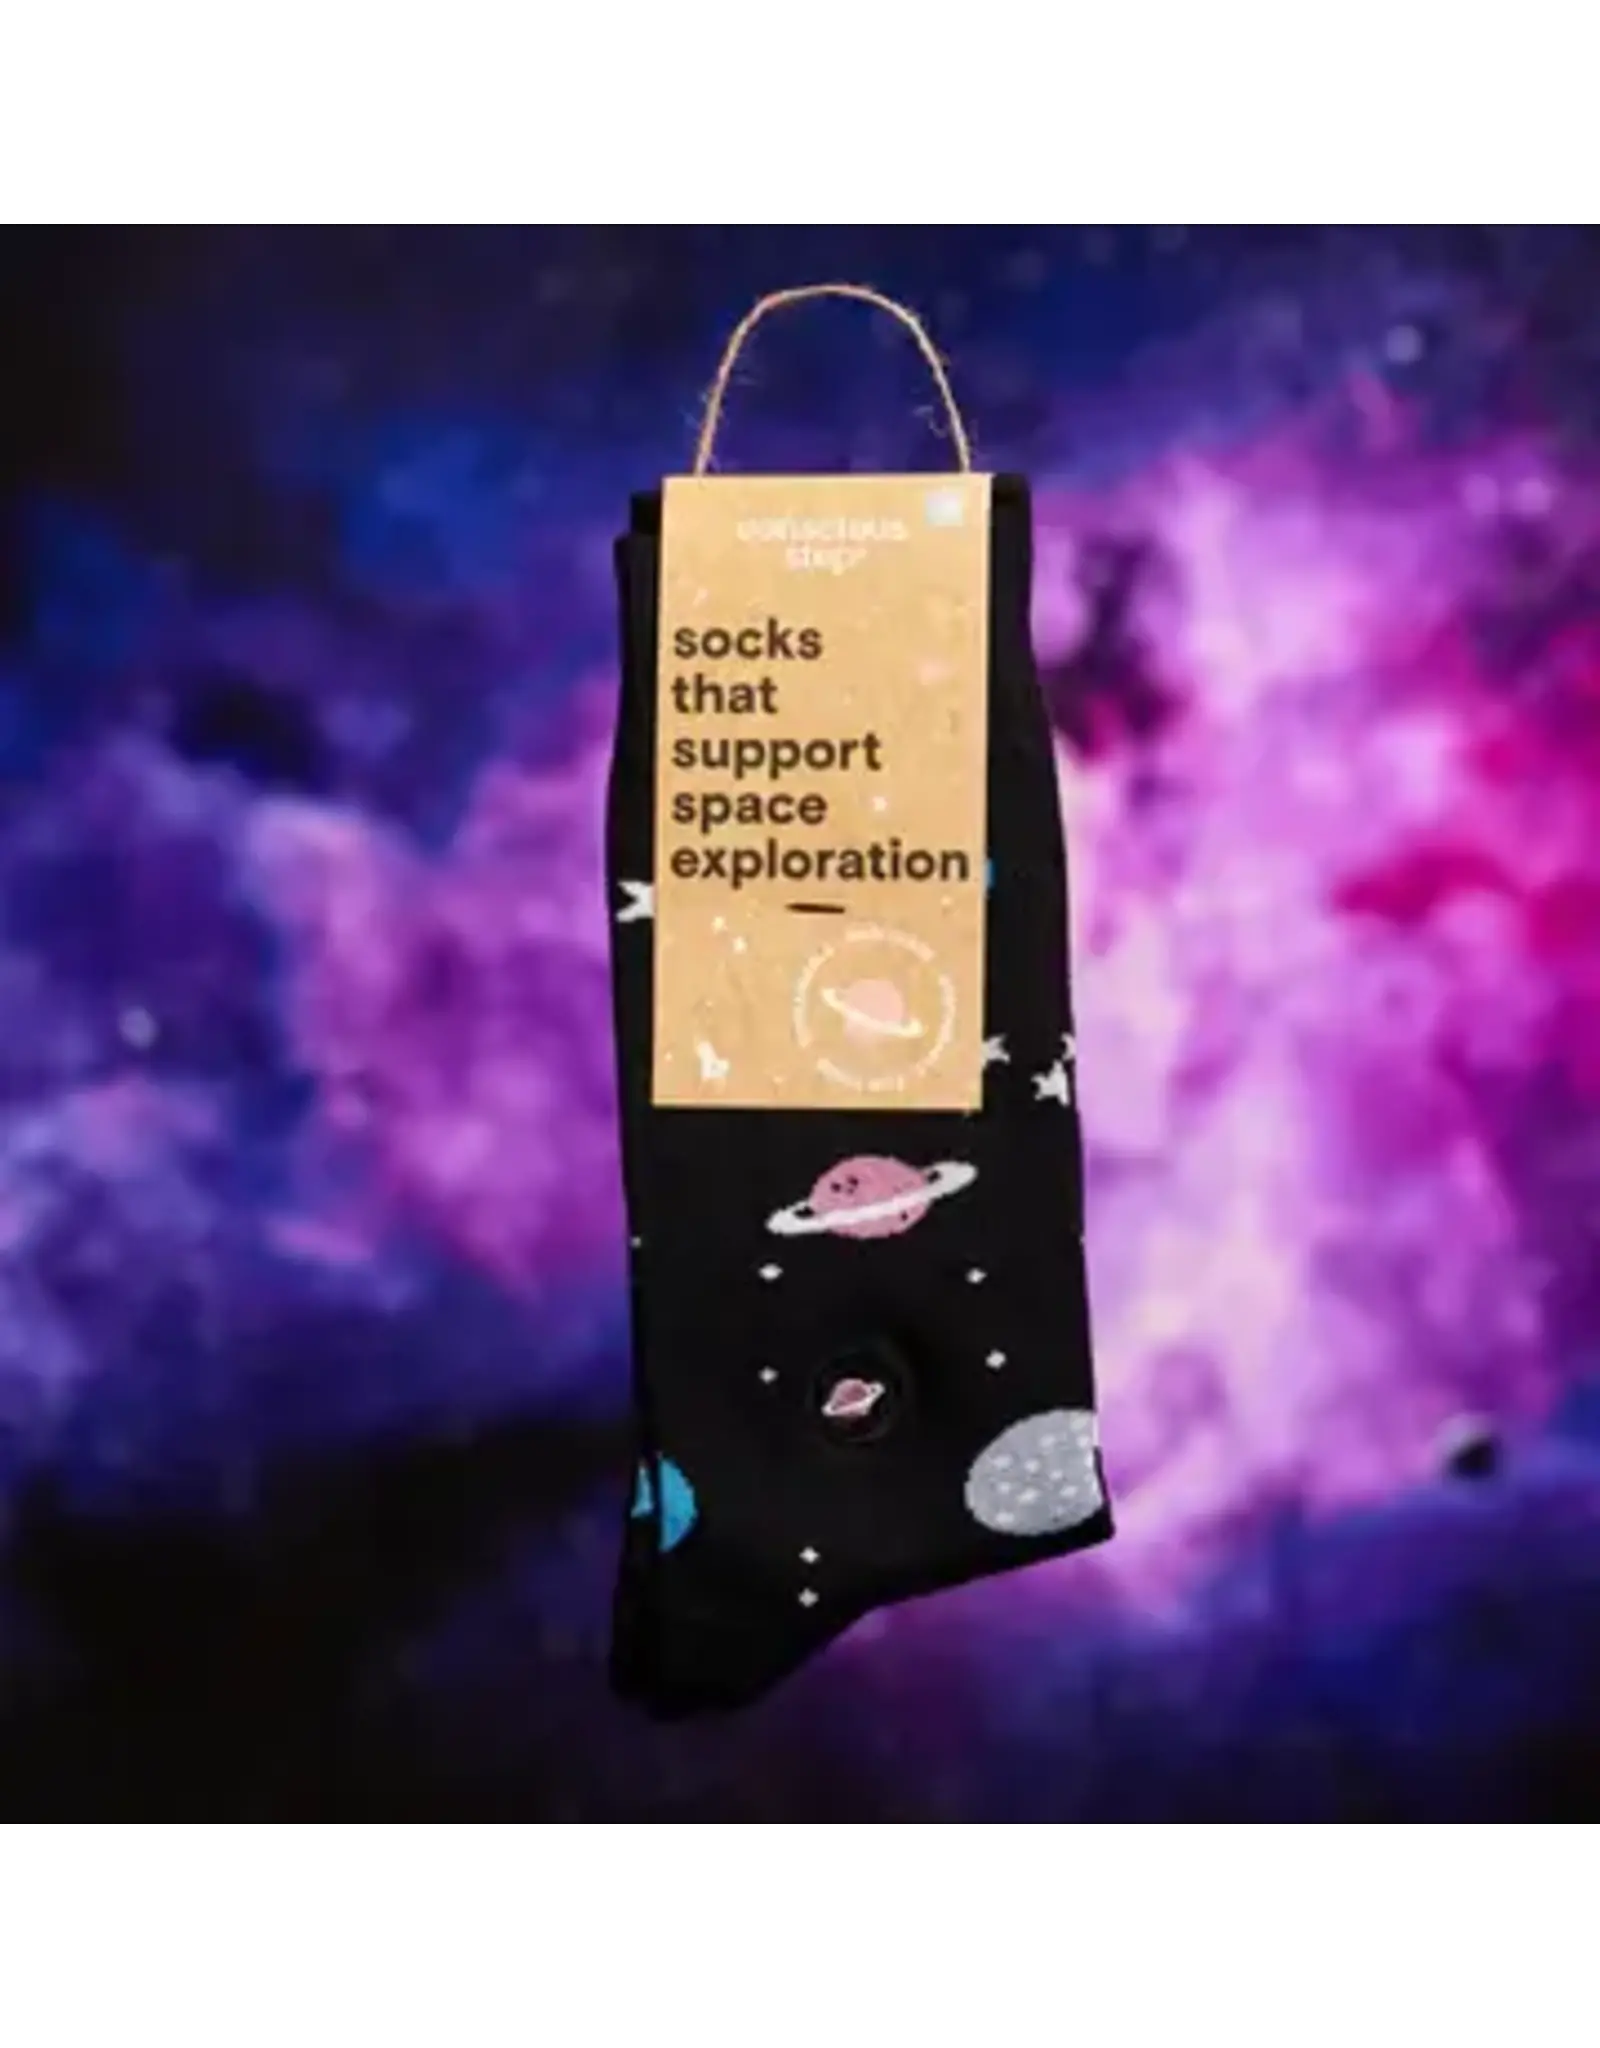 India Socks that Support Space Exploration